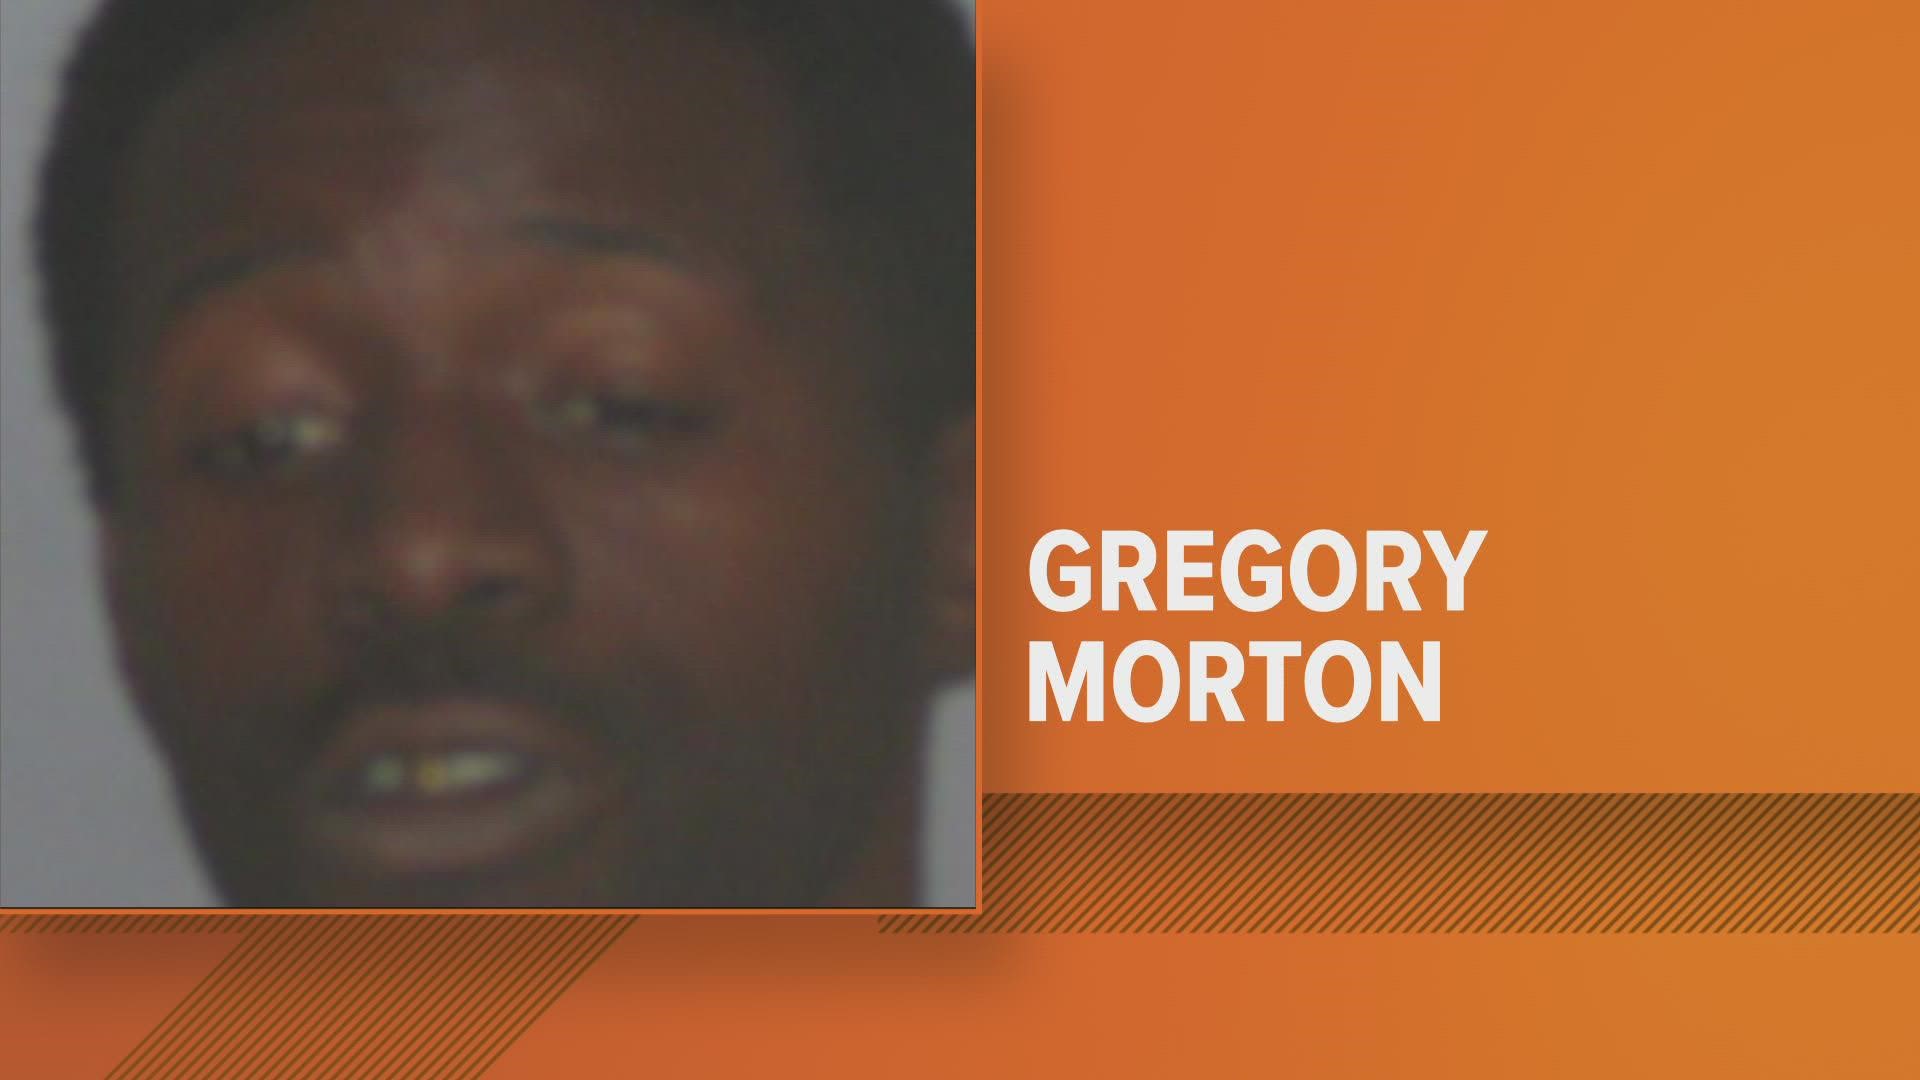 Gregory Morton is wanted by U.S. Marshals on charges of first-degree murder and federal probation violation.